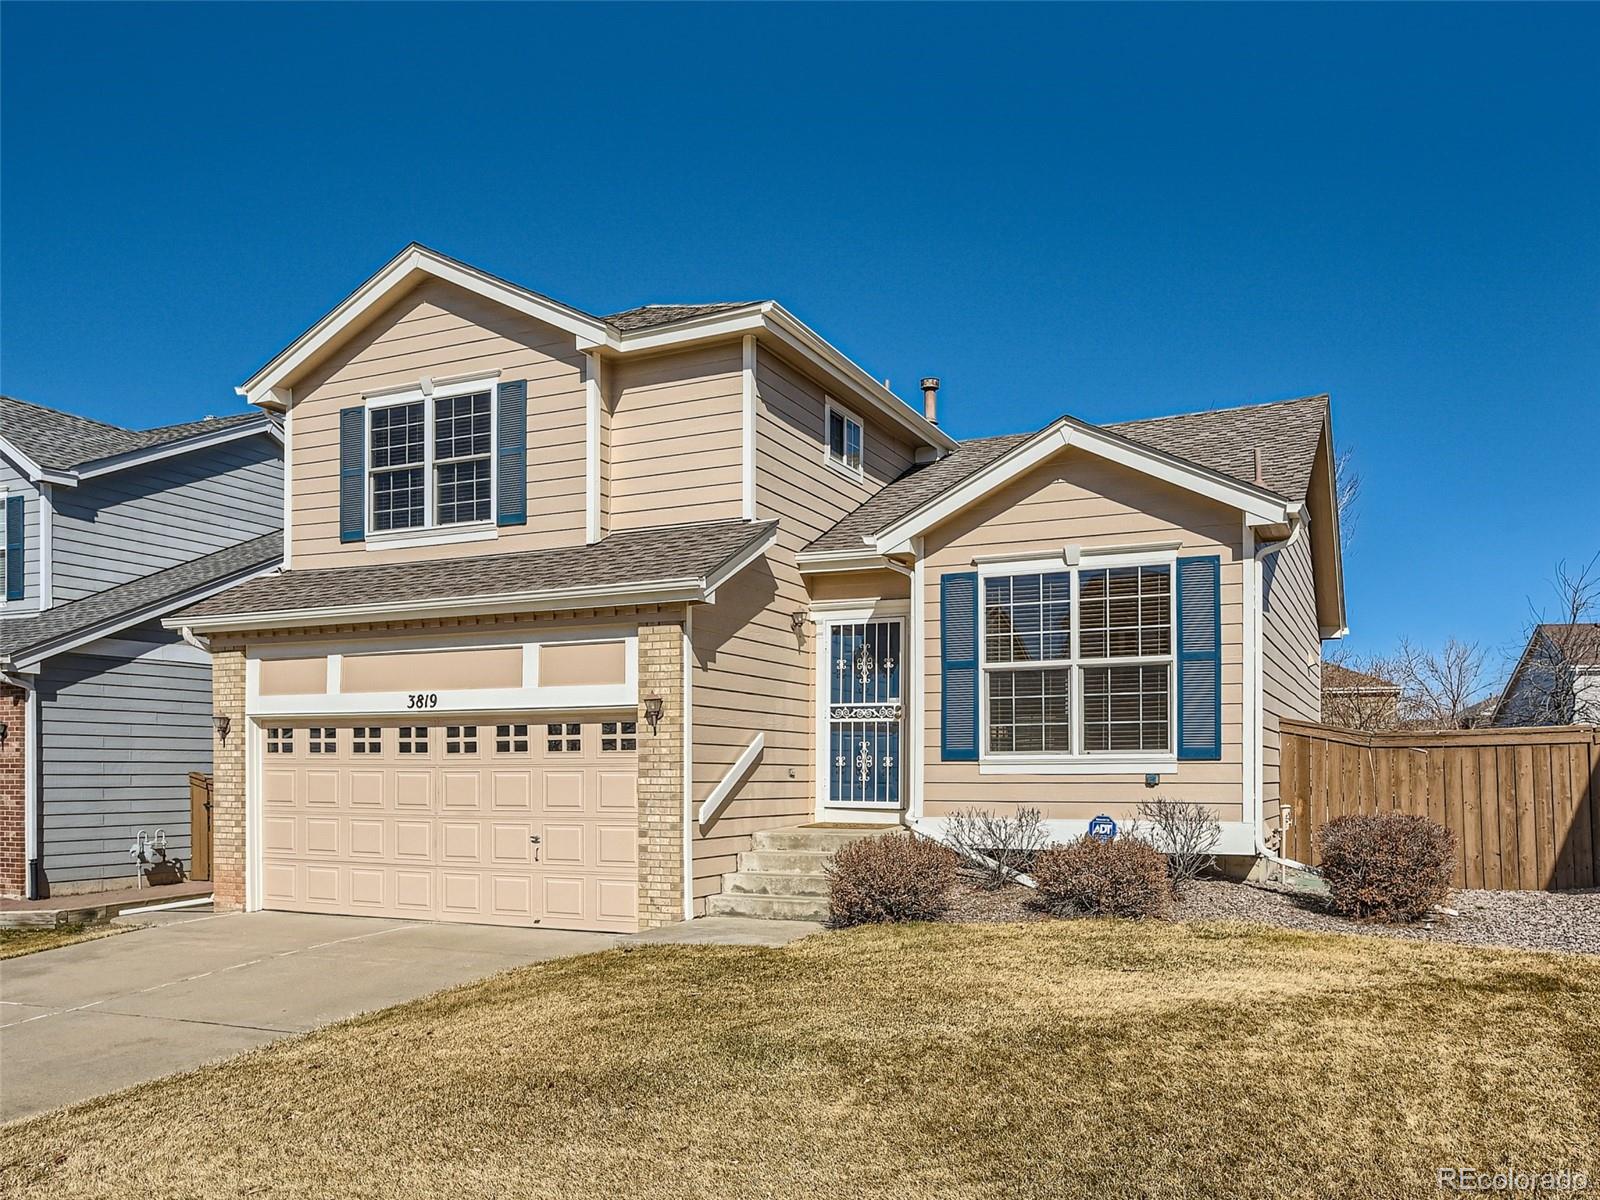 3819  garnet way, highlands ranch sold home. Closed on 2024-03-15 for $605,000.